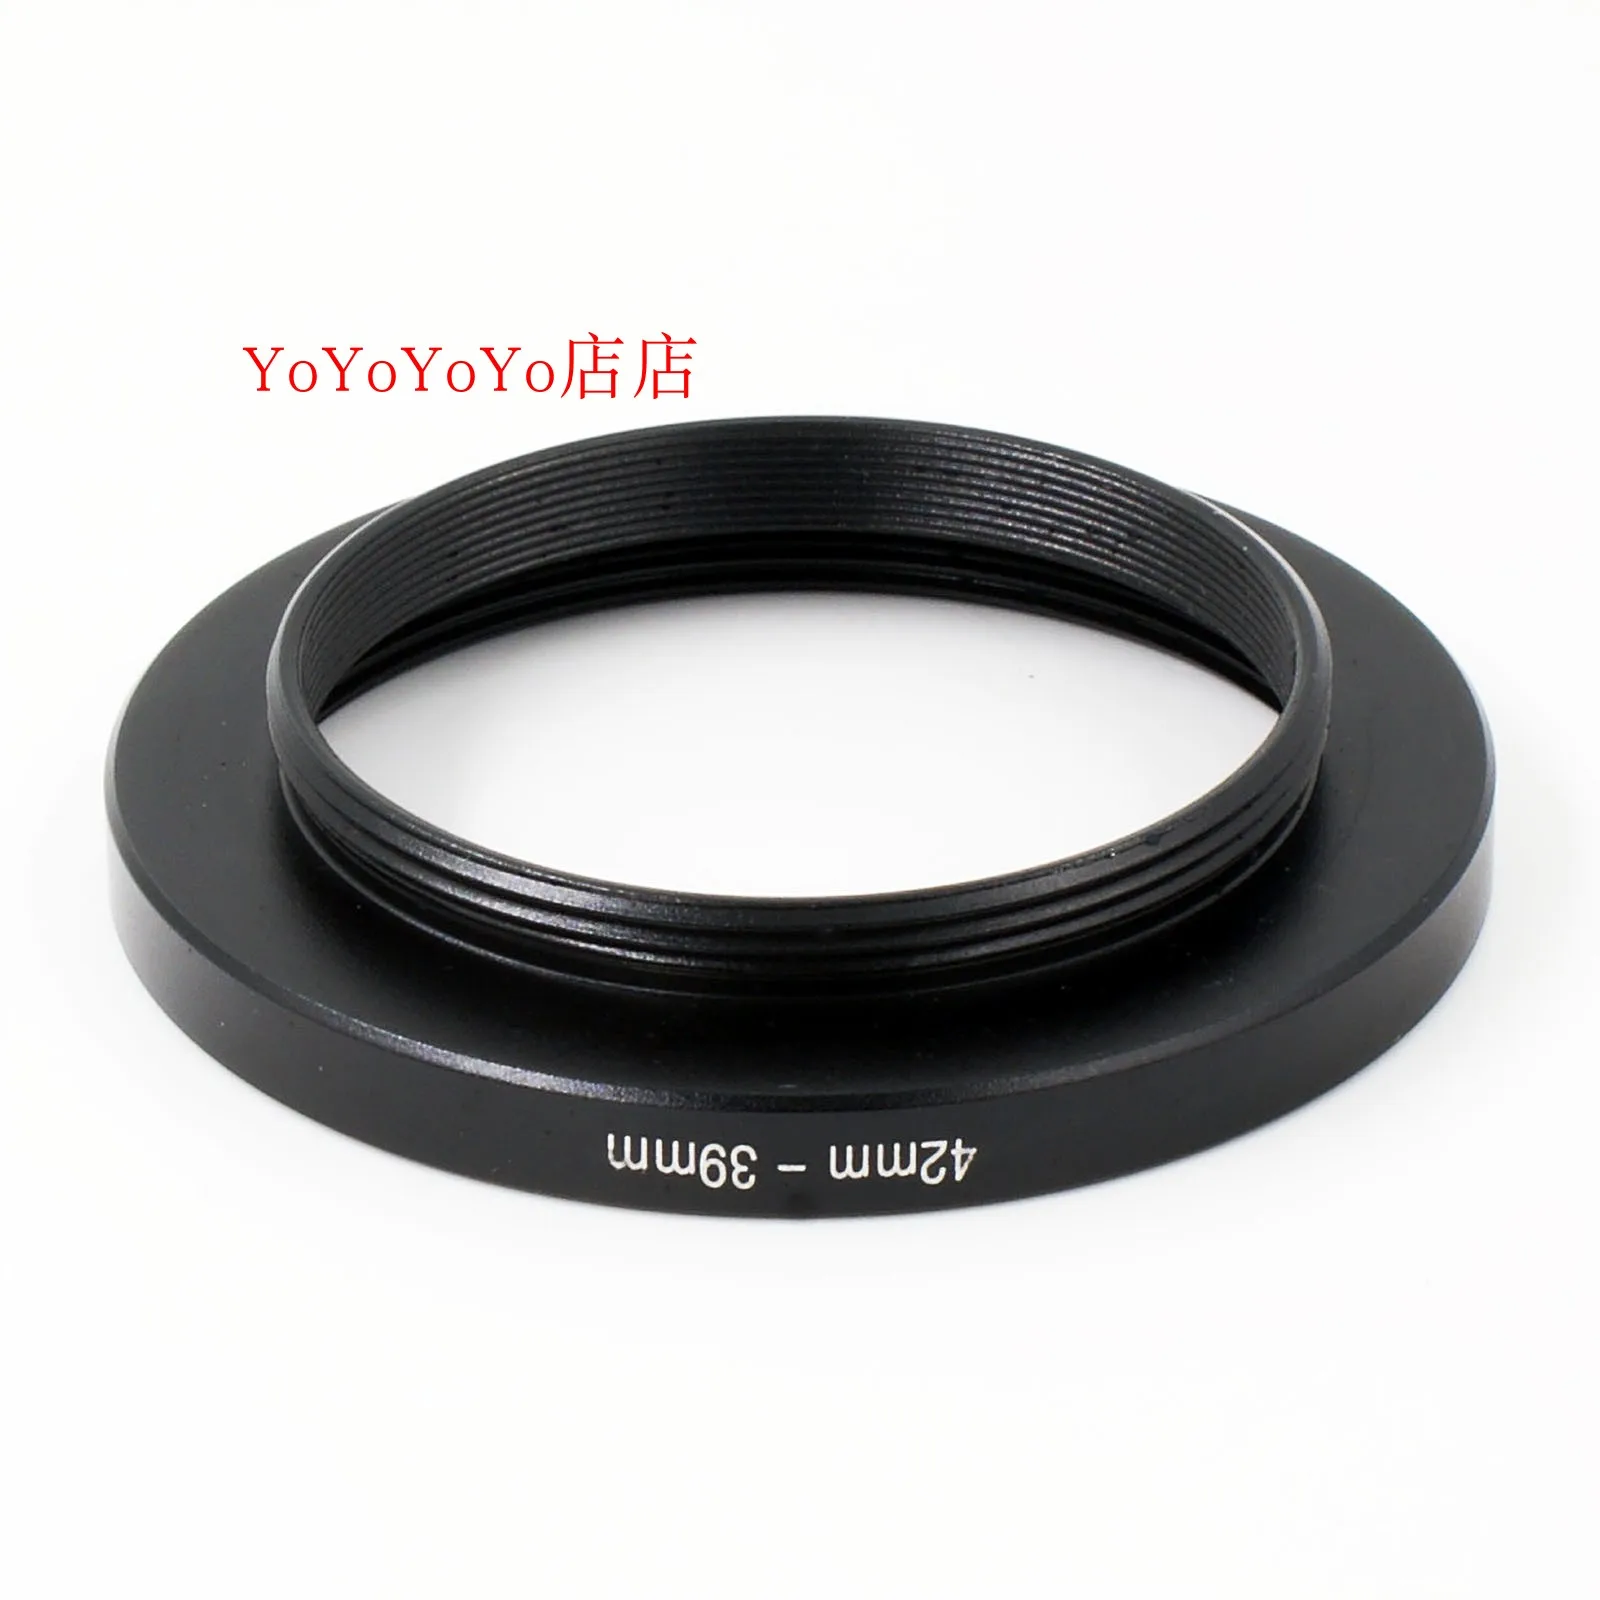 

m42-m39 42mm-39mm 4.5mm female 42mm to male 39mm M42 to M39 Lens Adapter ring step down for Leica Zenit camera